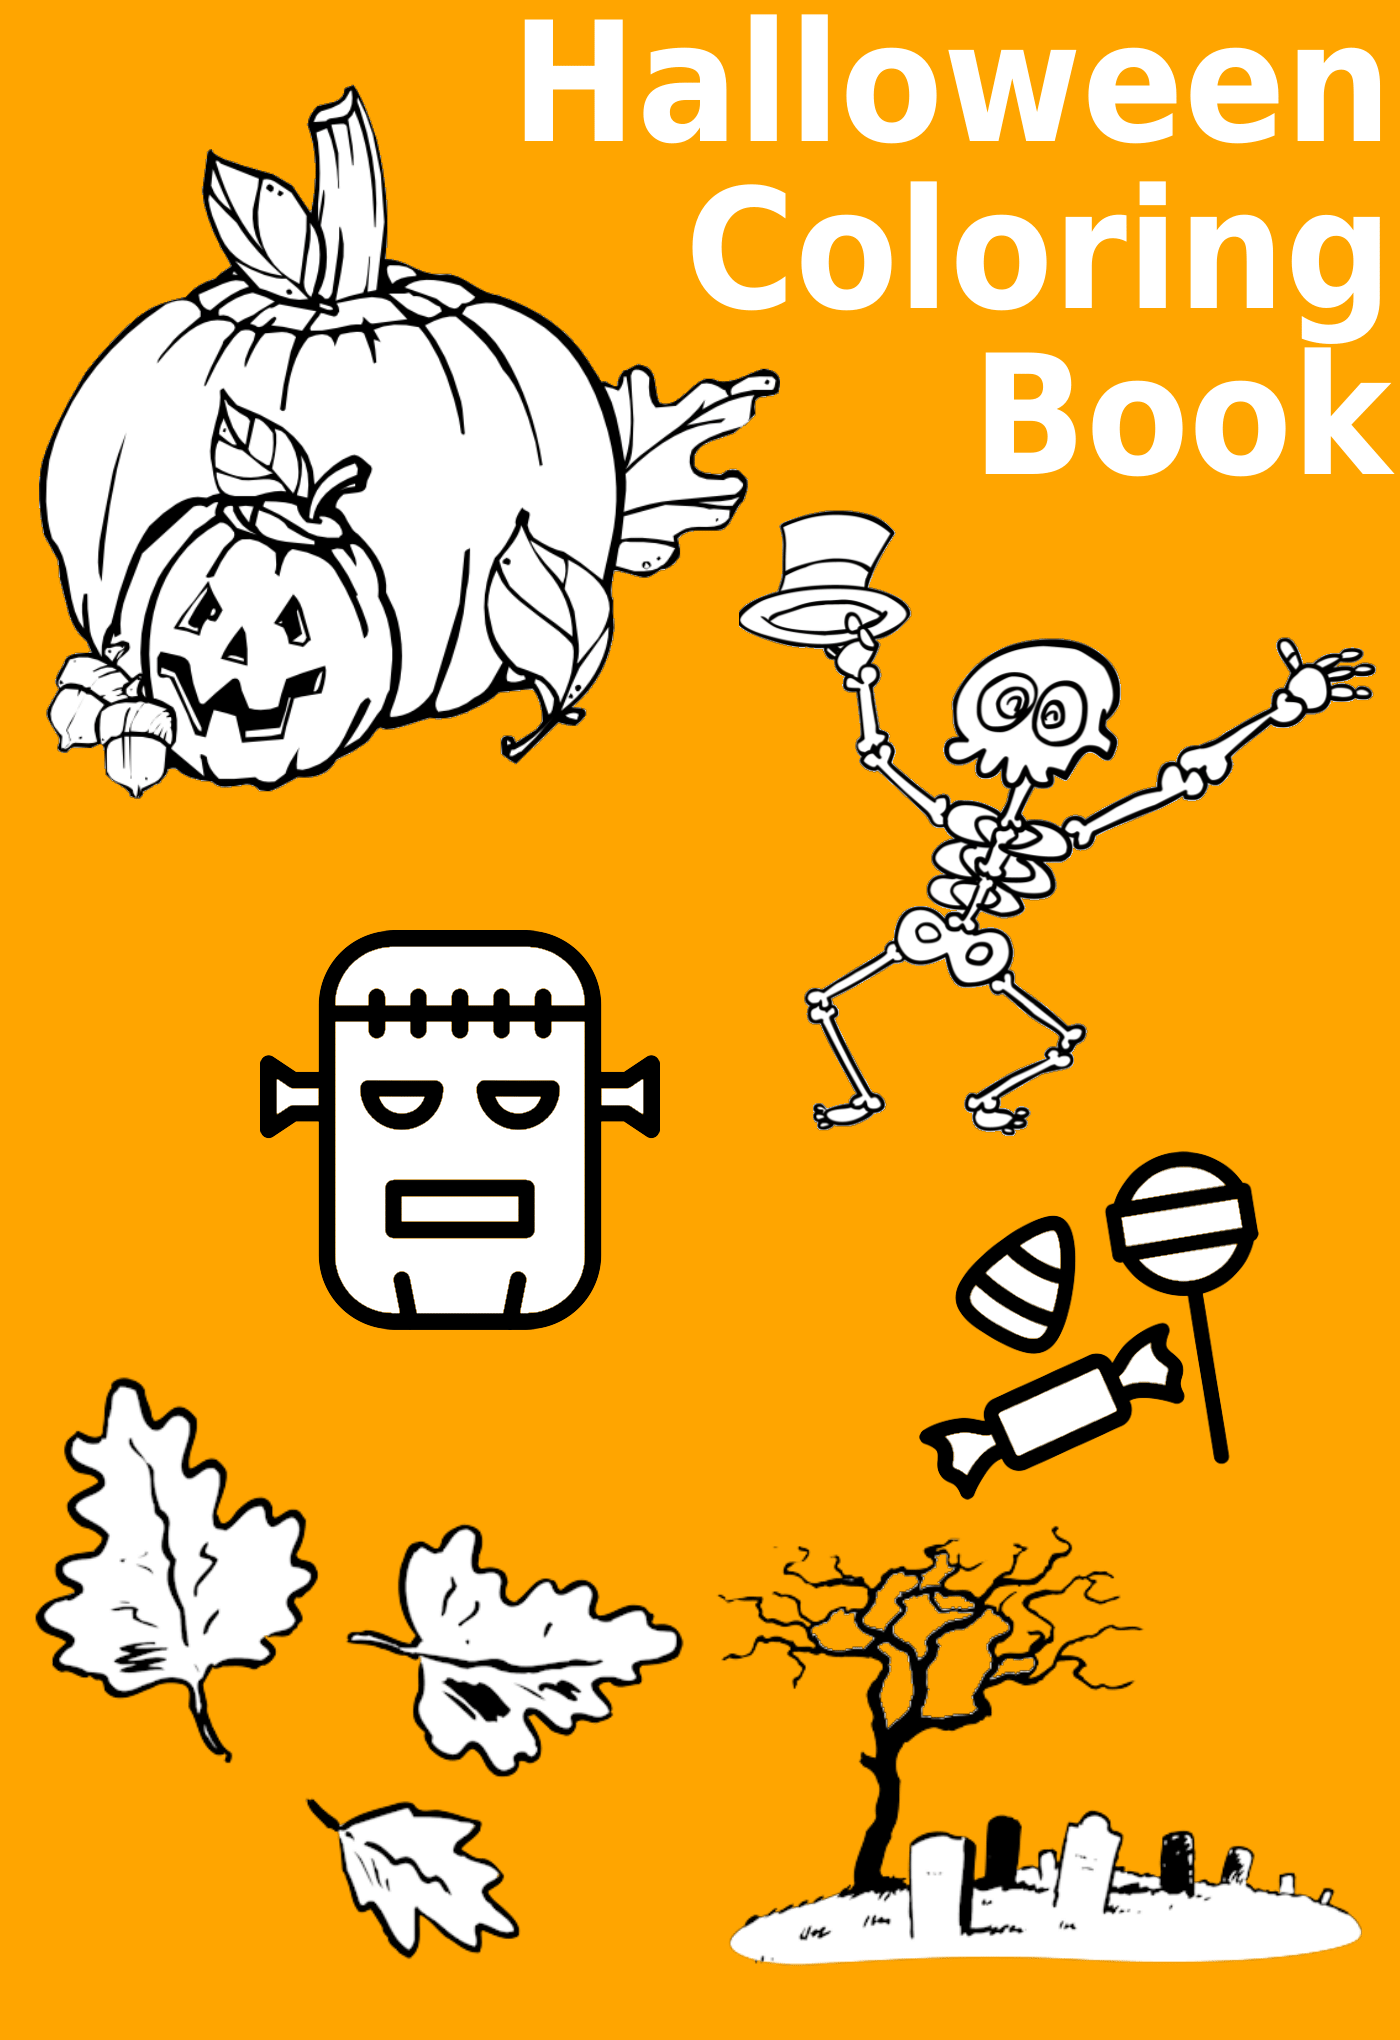 Halloween coloring book with 19 themed pictures